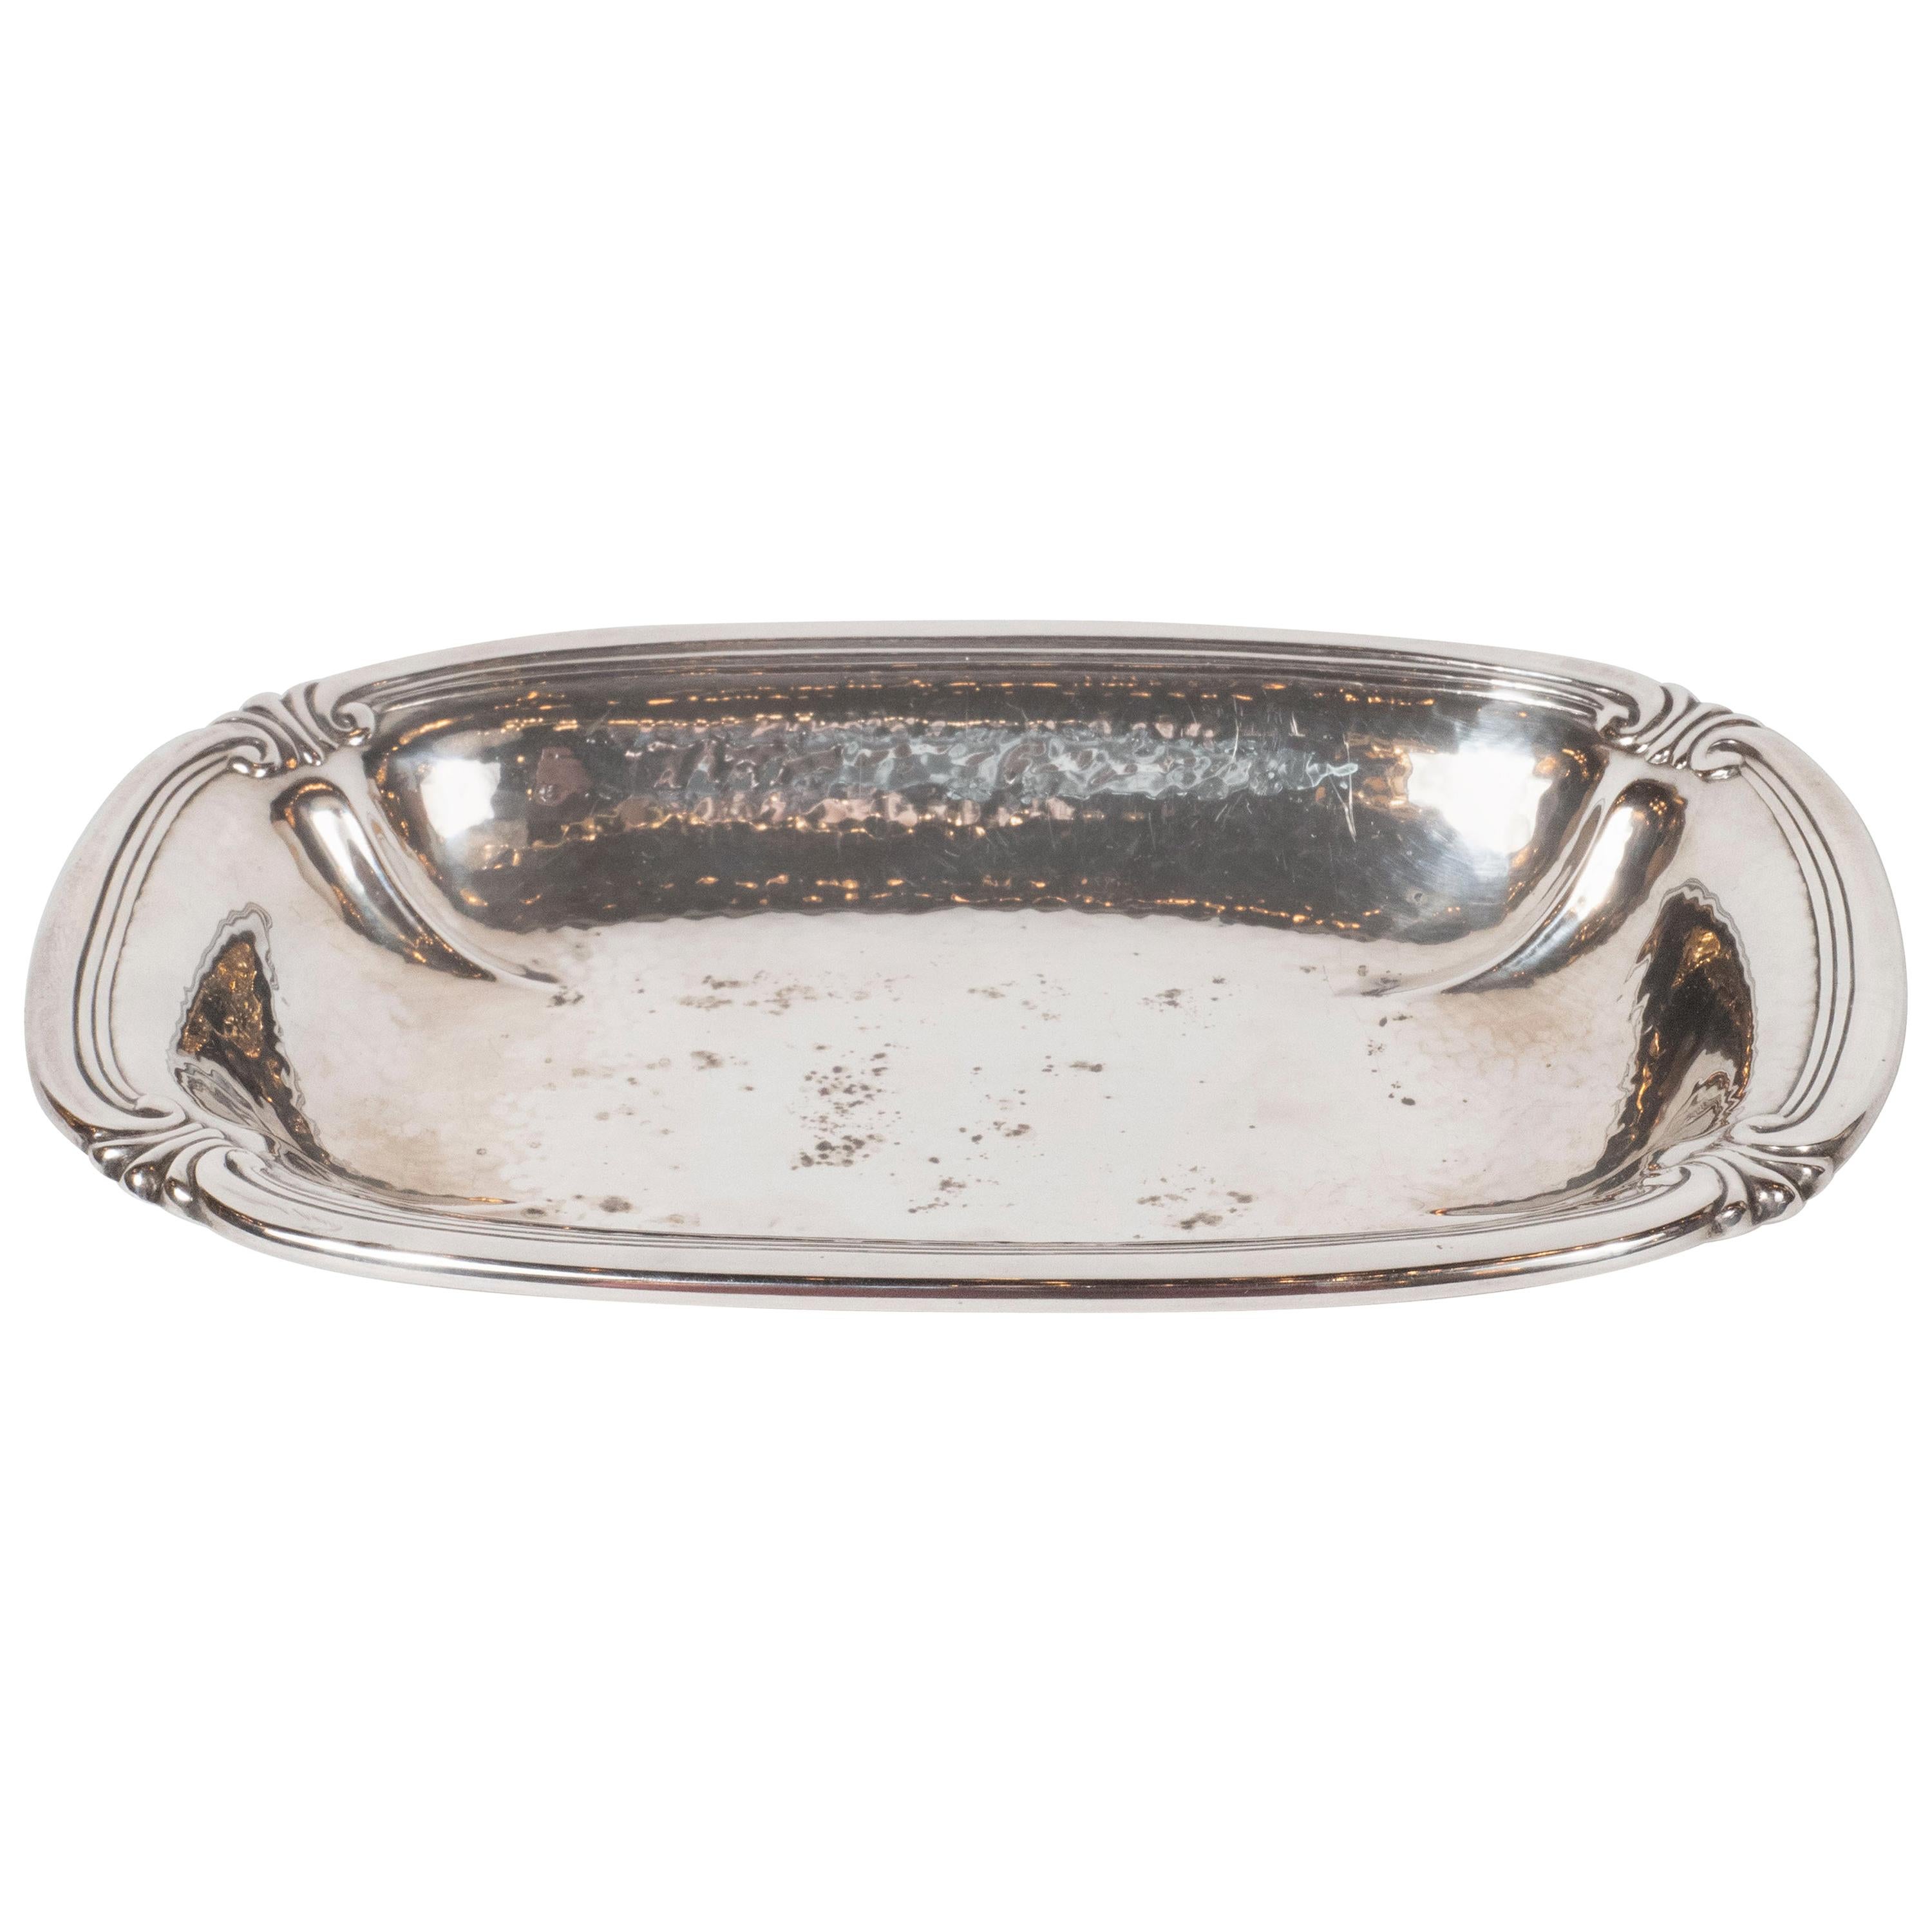 Art Deco Sterling Tray by International Silver Company with Neoclassical Details